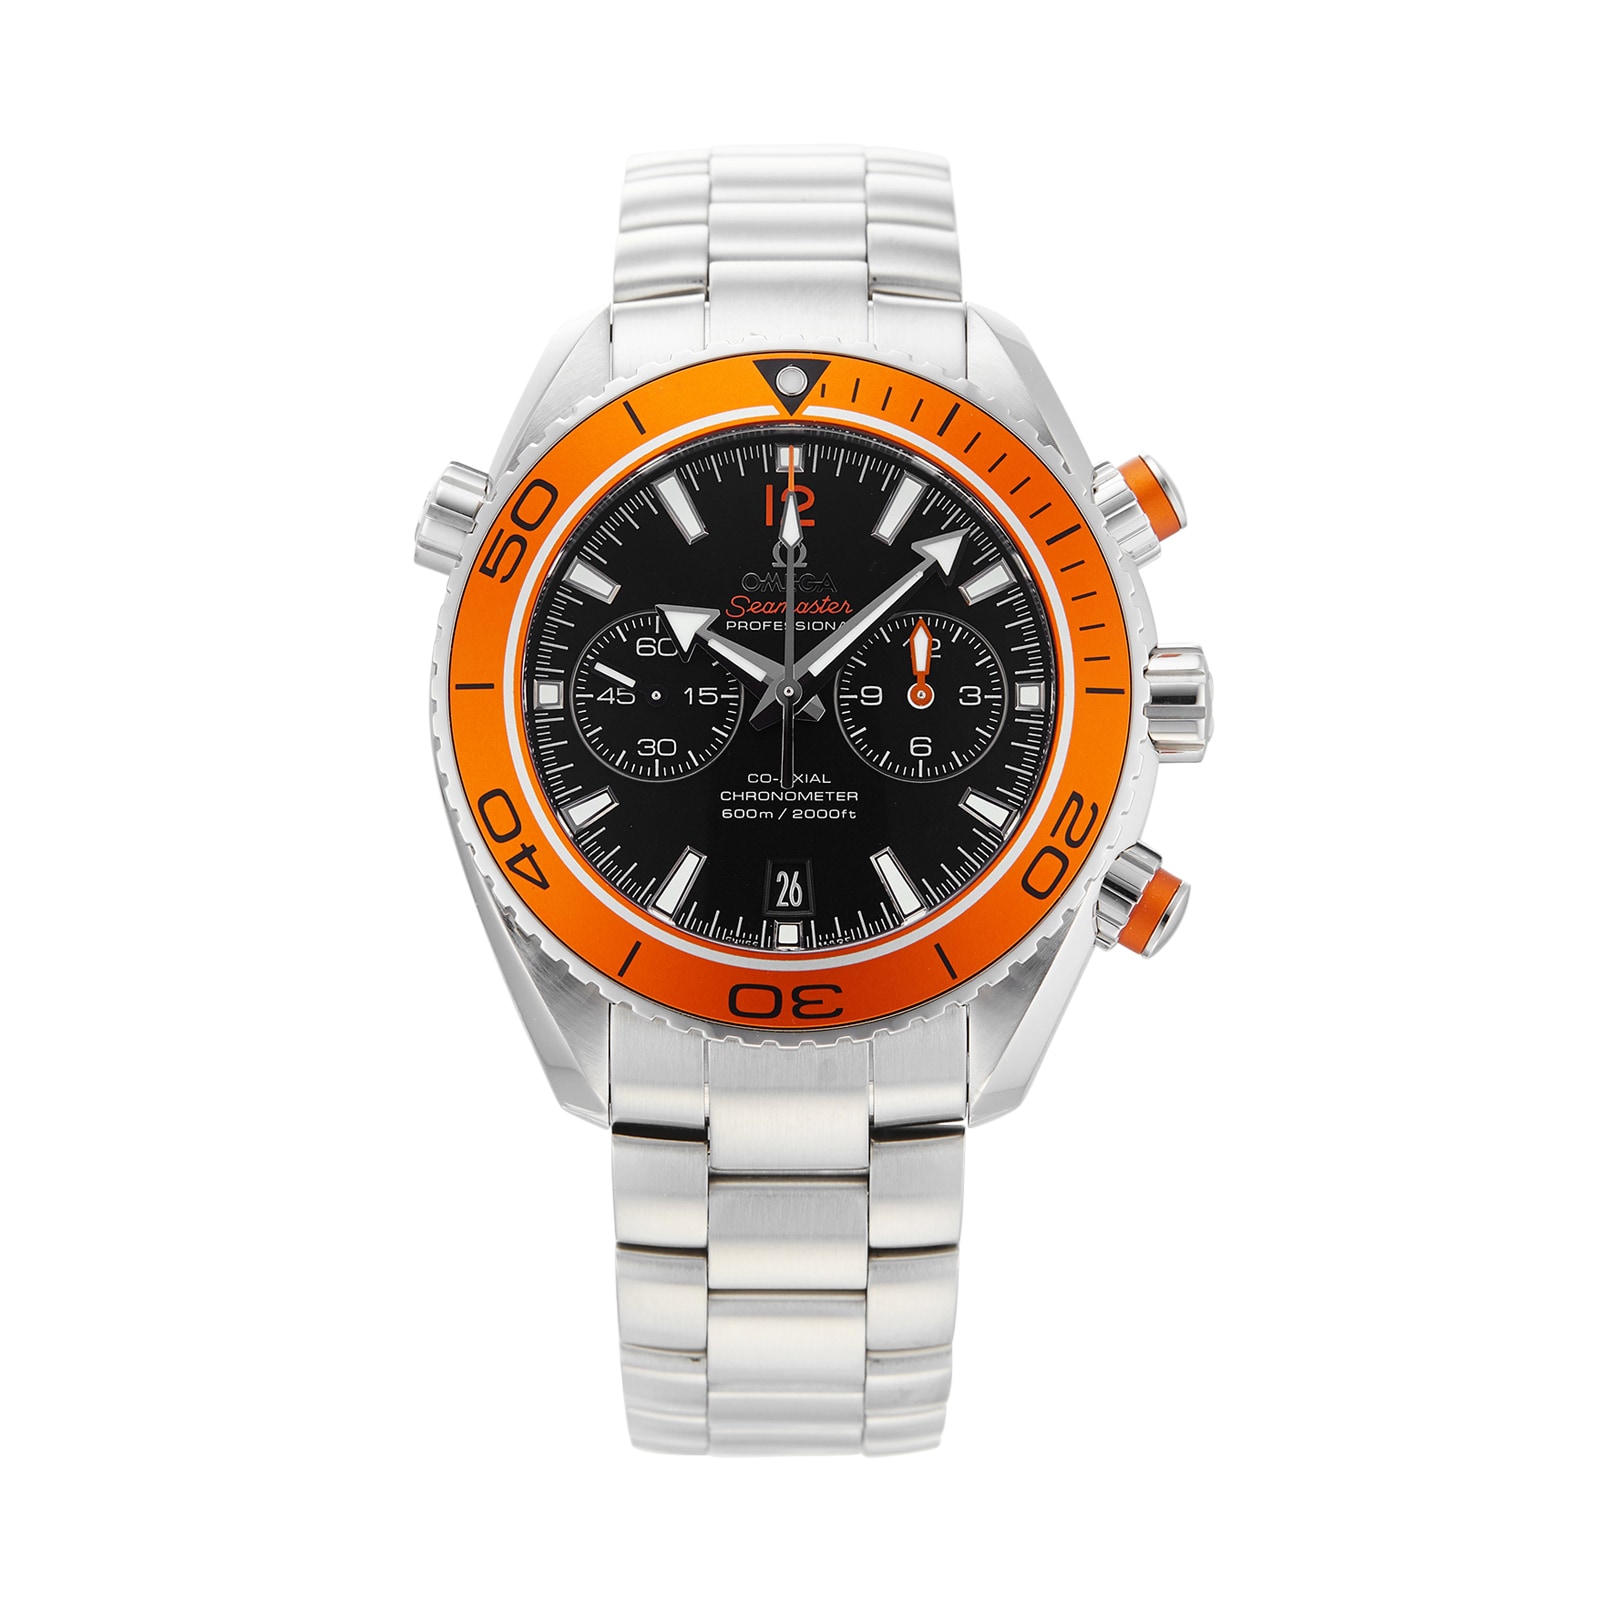 Pre-Owned Omega Seamaster Planet Ocean 600M Mens Watch 232.30.46.51.01.002